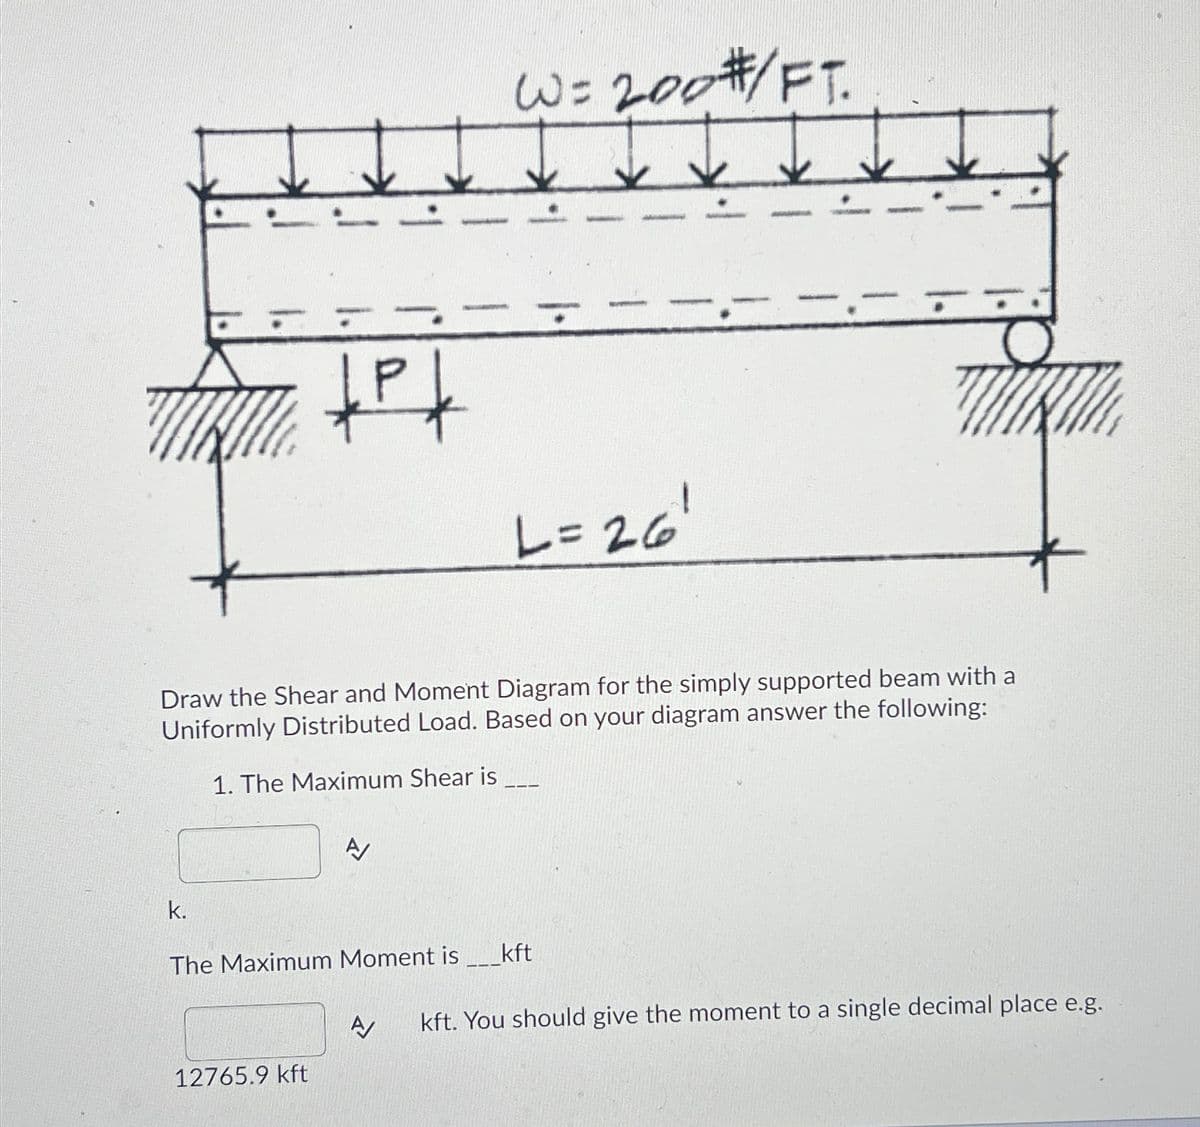 TRIL
+P+
k.
W= 200 #/FT.
200
Draw the Shear and Moment Diagram for the simply supported beam with a
Uniformly Distributed Load. Based on your diagram answer the following:
1. The Maximum Shear is
A
12765.9 kft
L=261
The Maximum Moment is _____kft
TIKI
A kft. You should give the moment to a single decimal place e.g.